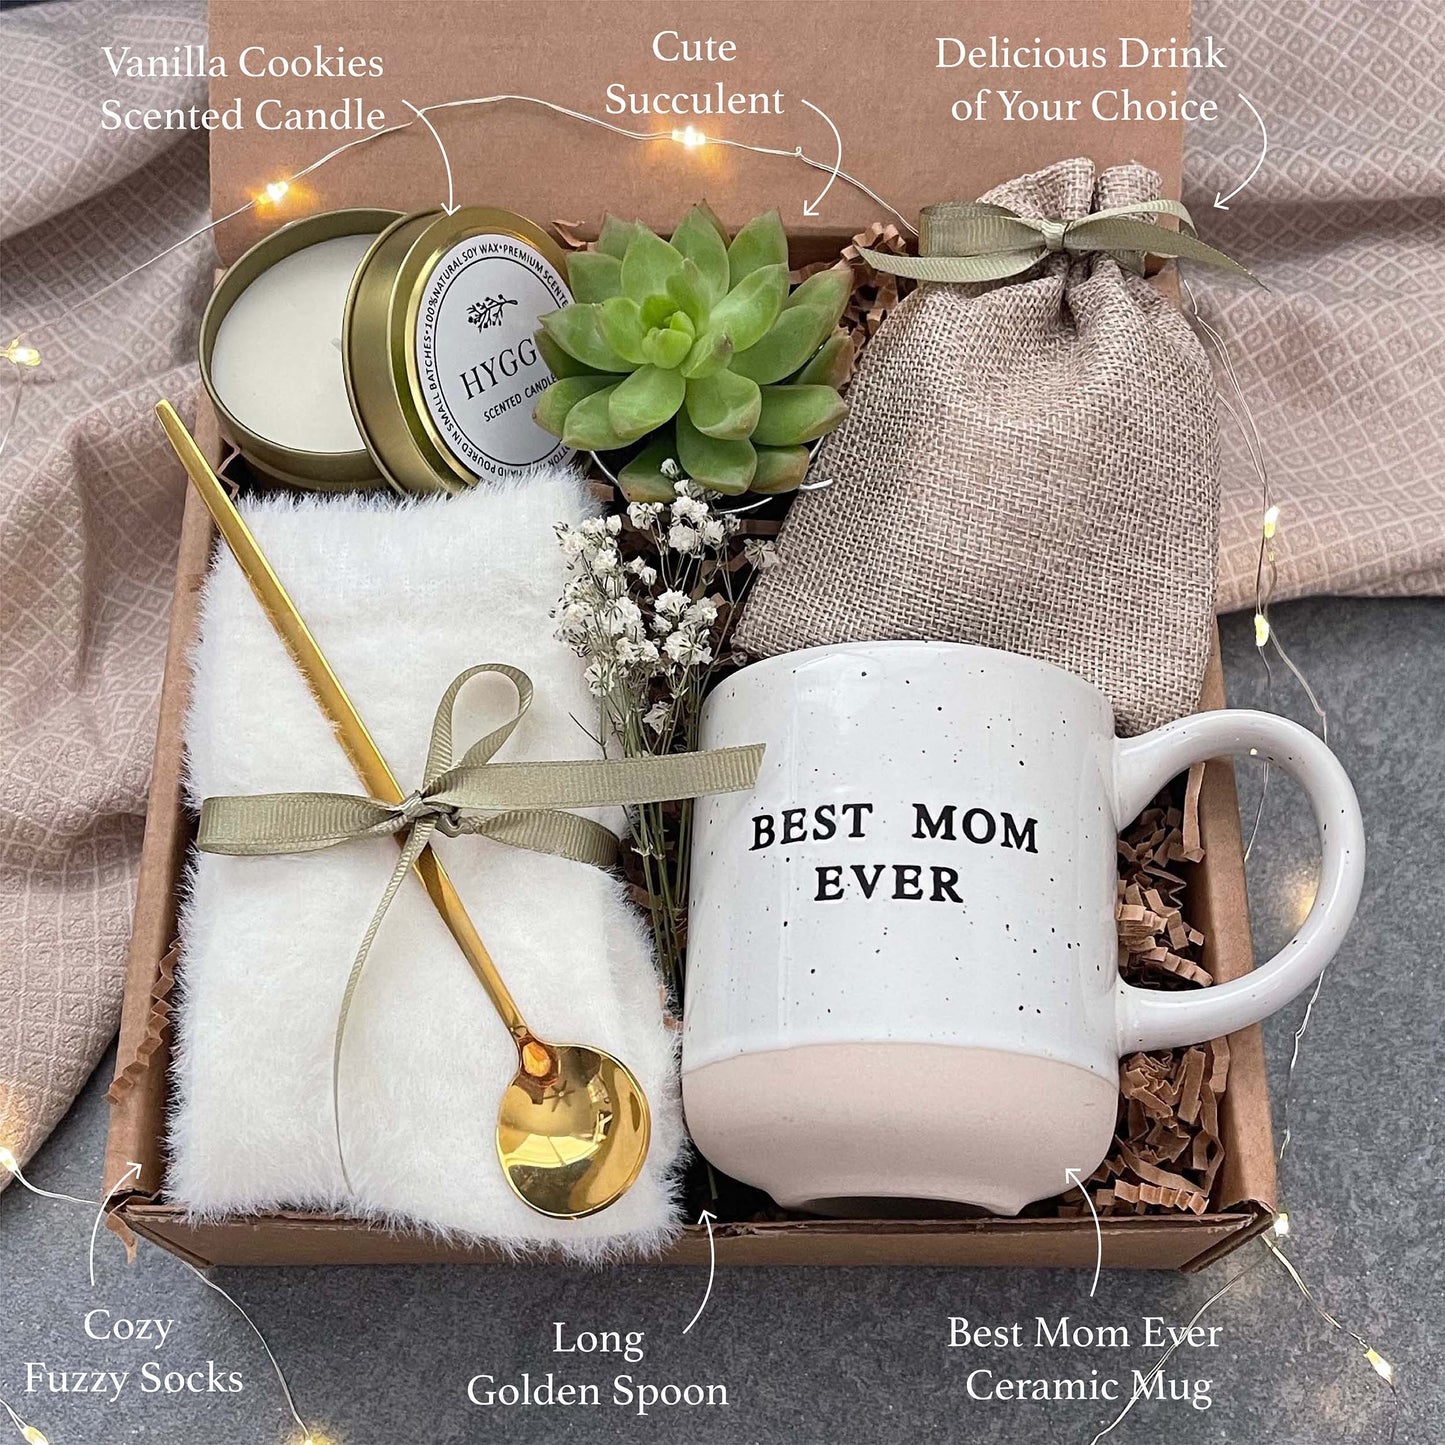 22 Fantastic Family gift ideas * Moms and Crafters